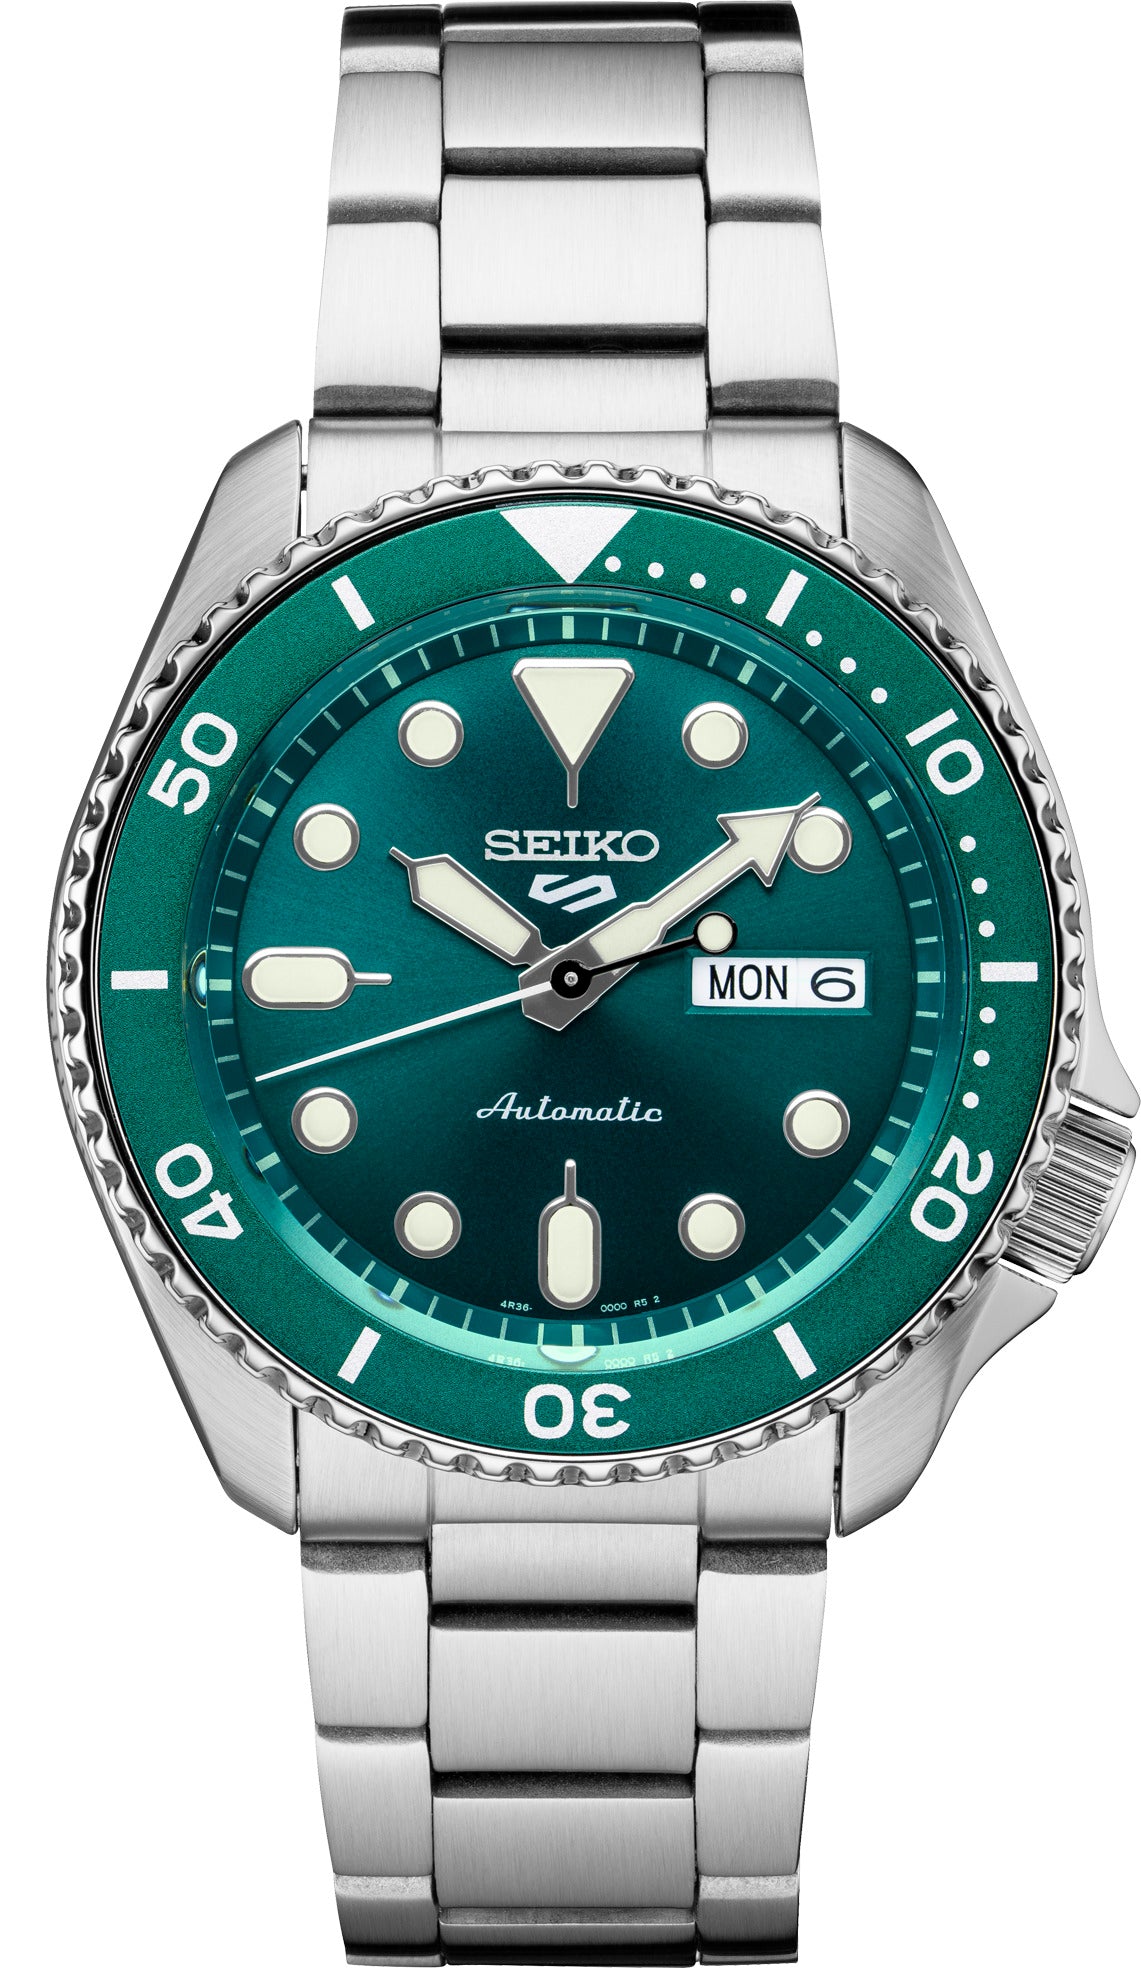 Seiko 5 Sports Men's Stainless Watch in color Silver-Tone, green from the front view